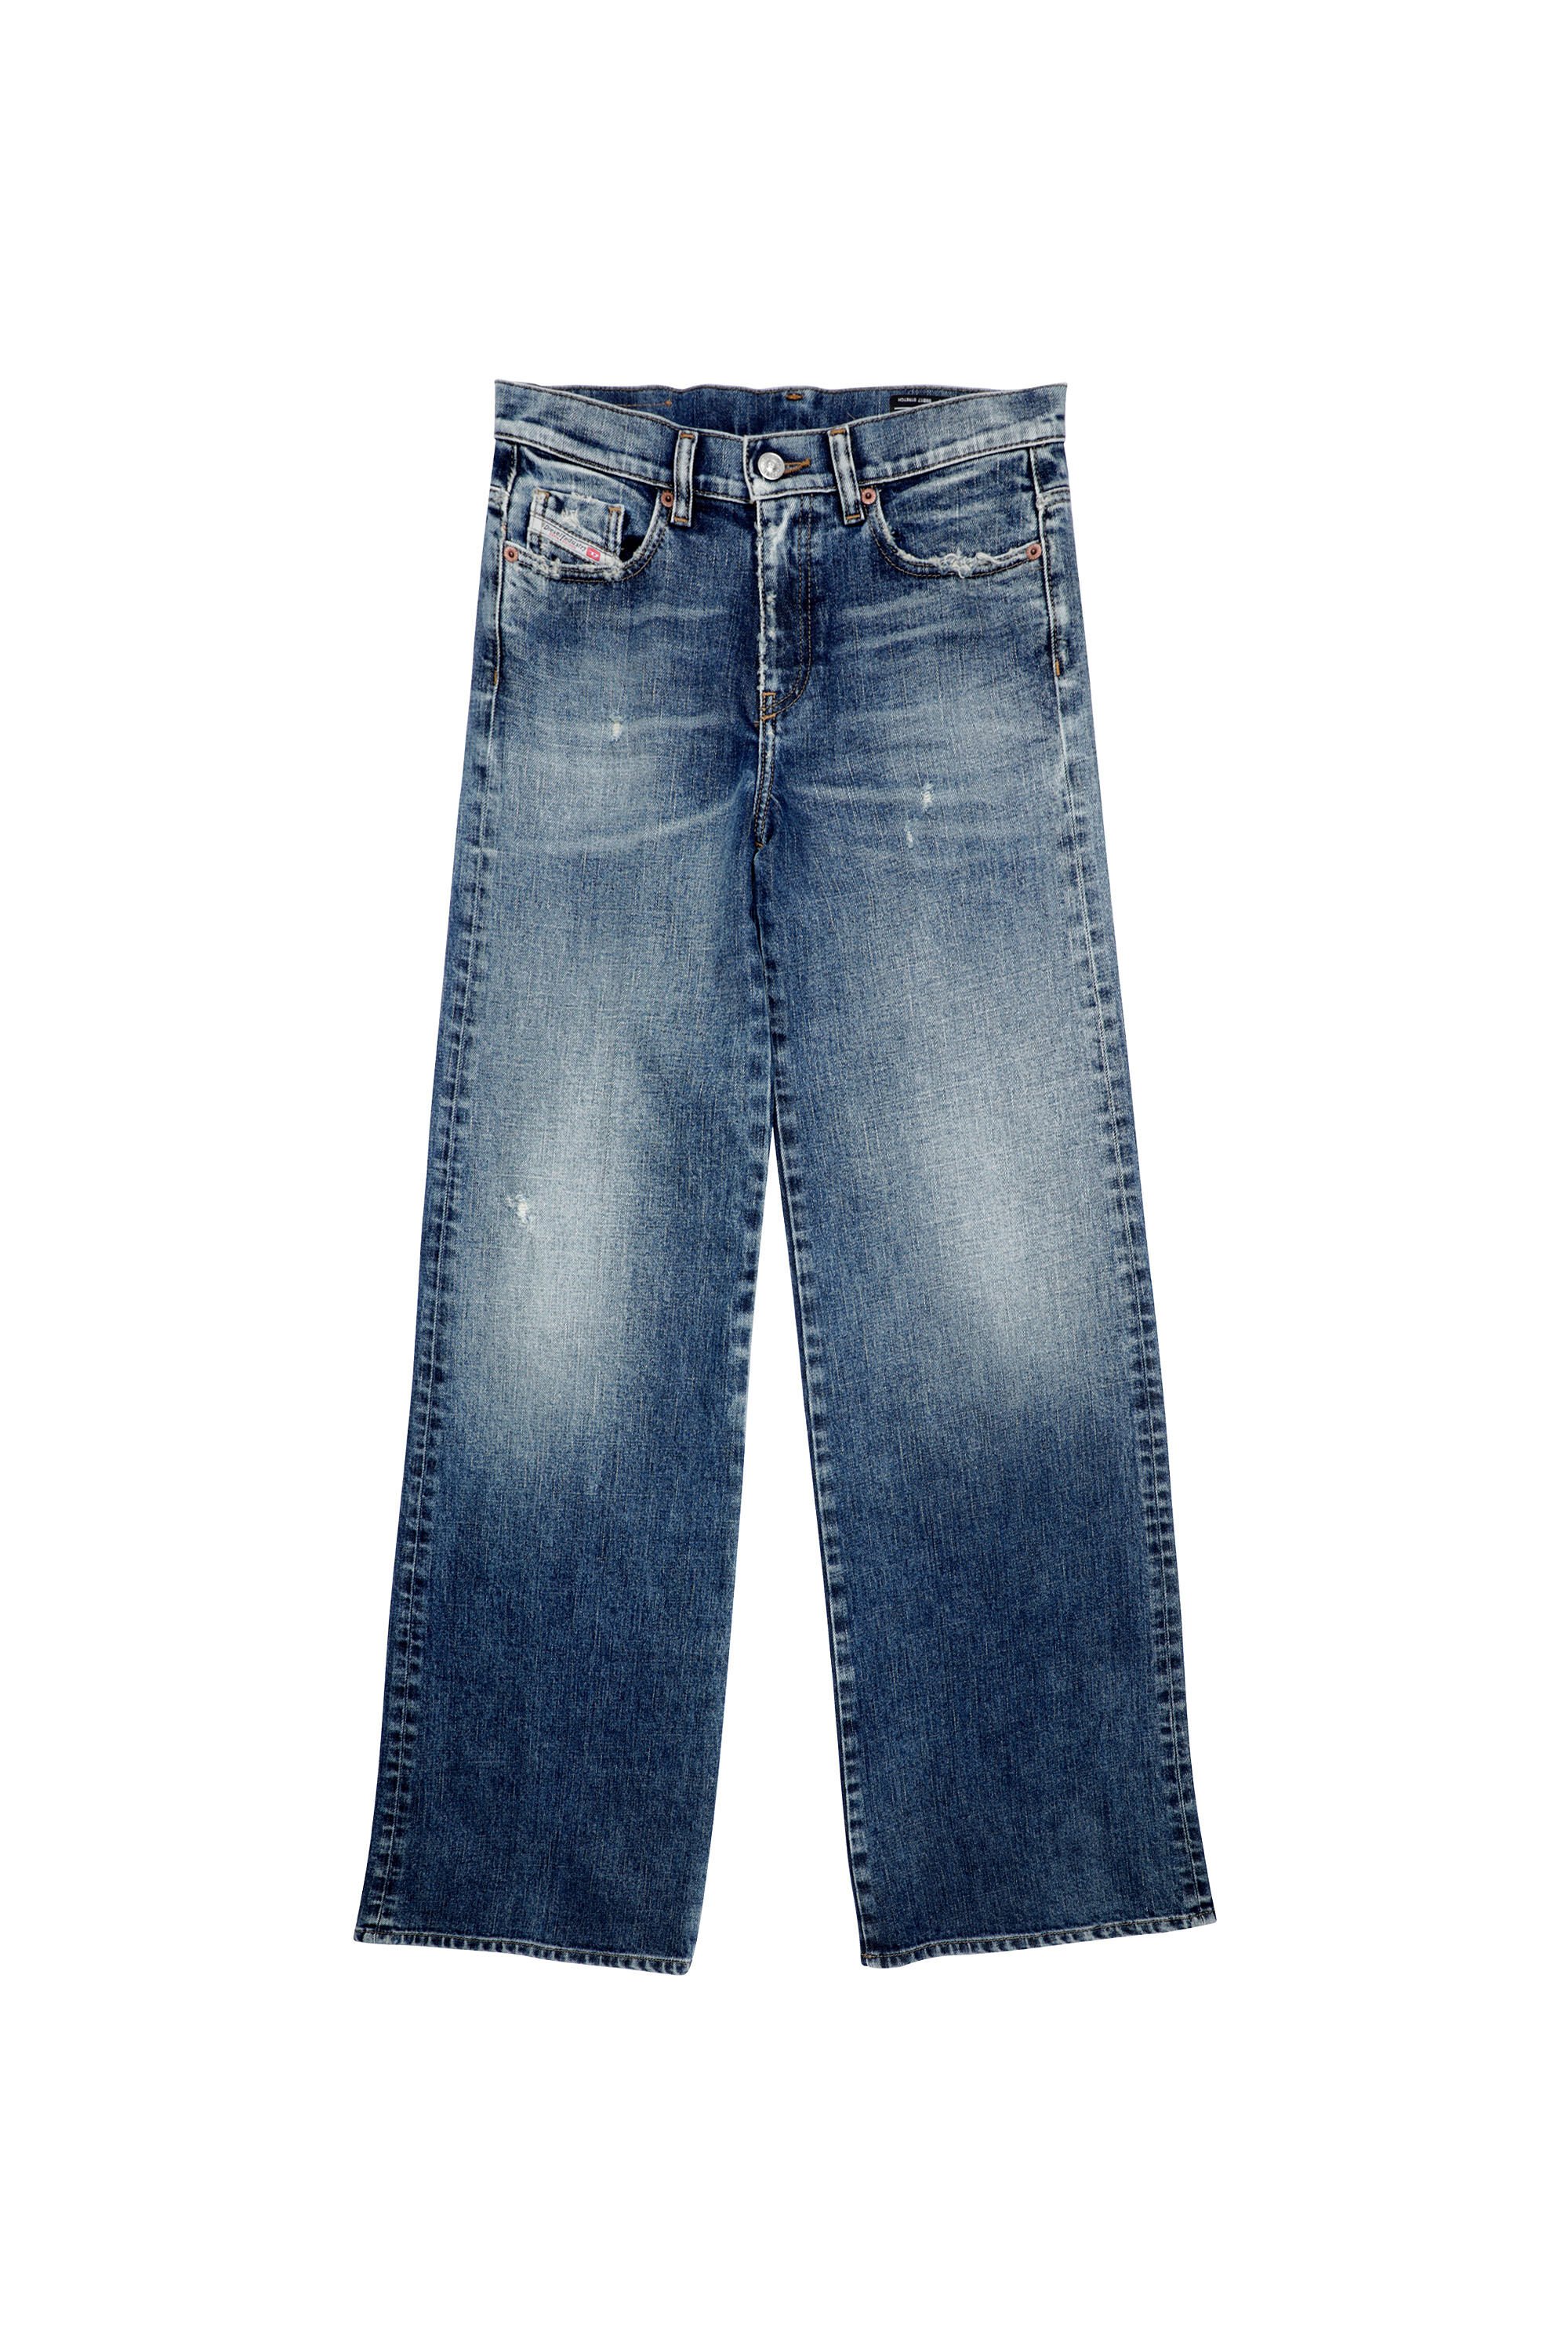 Diesel - D-Akemi 09B17 Bootcut and Flare Jeans,  - Image 2